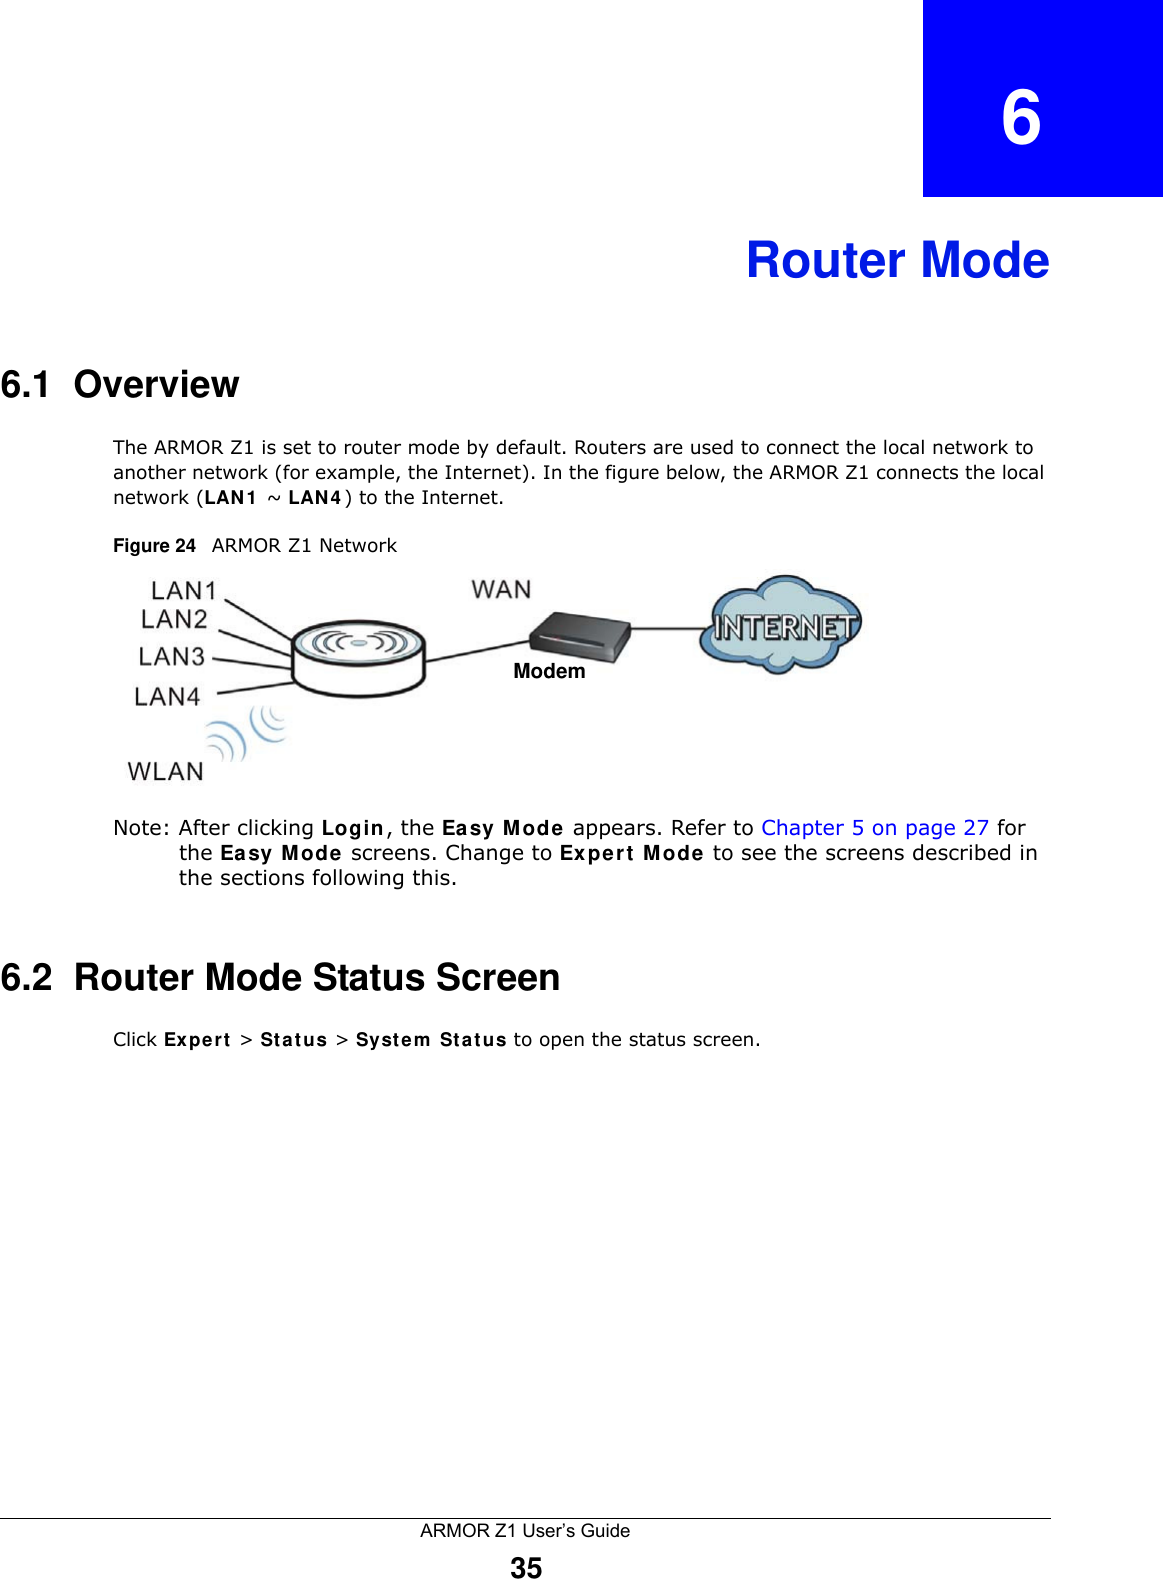 ARMOR Z1 User’s Guide35CHAPTER   6Router Mode6.1  OverviewThe ARMOR Z1 is set to router mode by default. Routers are used to connect the local network to another network (for example, the Internet). In the figure below, the ARMOR Z1 connects the local network (LAN1 ~ LAN4) to the Internet.Figure 24   ARMOR Z1 NetworkNote: After clicking Login, the Easy Mode appears. Refer to Chapter 5 on page 27 for the Easy Mode screens. Change to Expert Mode to see the screens described in the sections following this.6.2  Router Mode Status ScreenClick Expert &gt; Status &gt; System Status to open the status screen. Modem